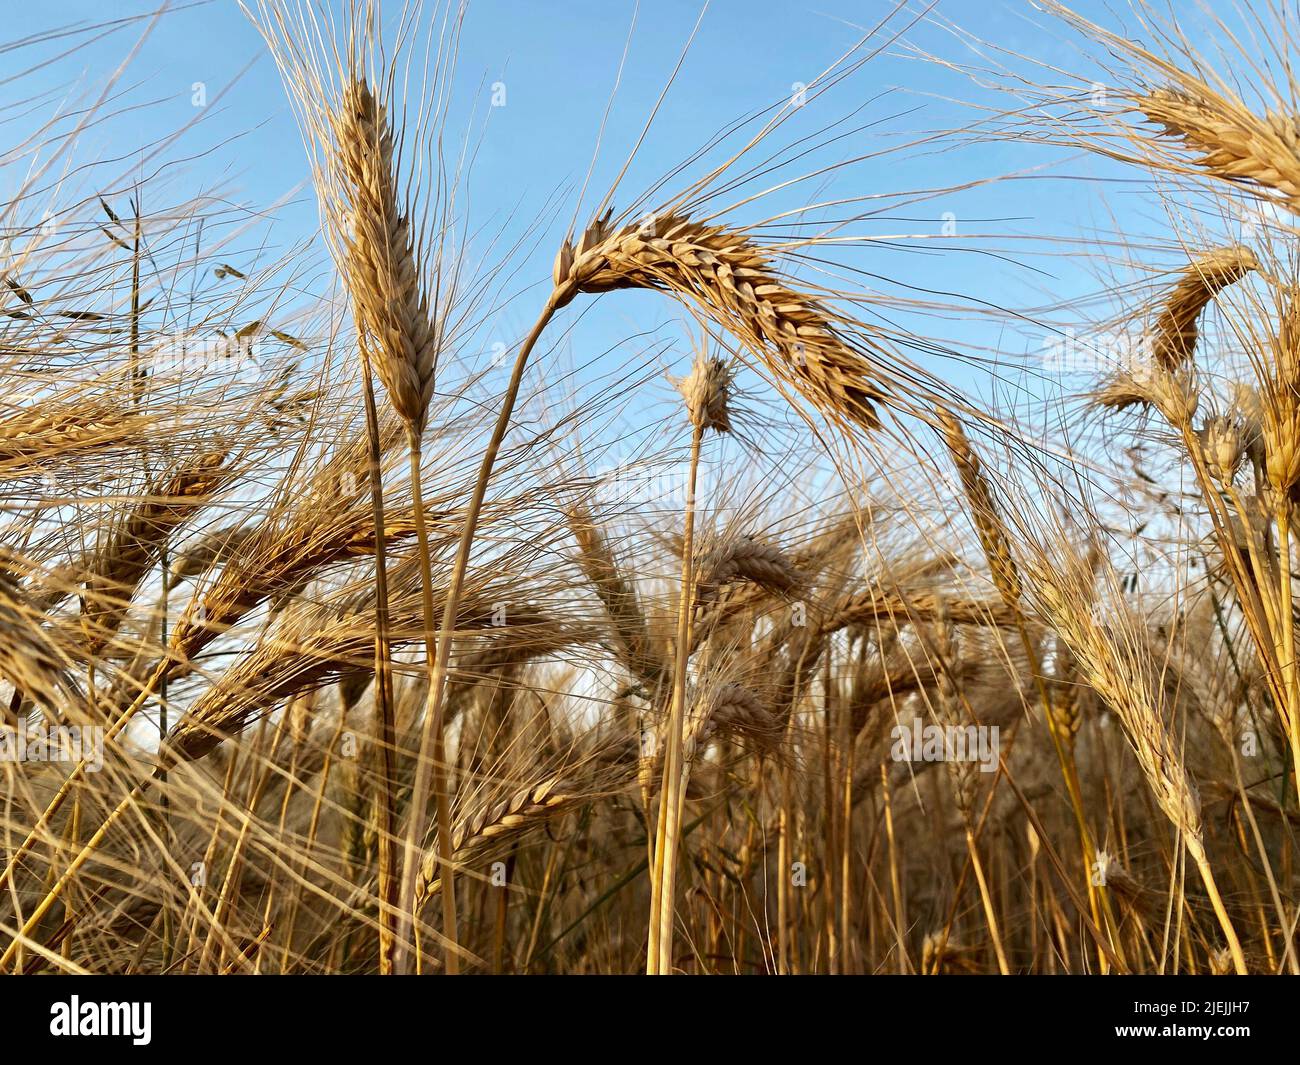 ears of ripe wheat in background blue sky Stock Photo